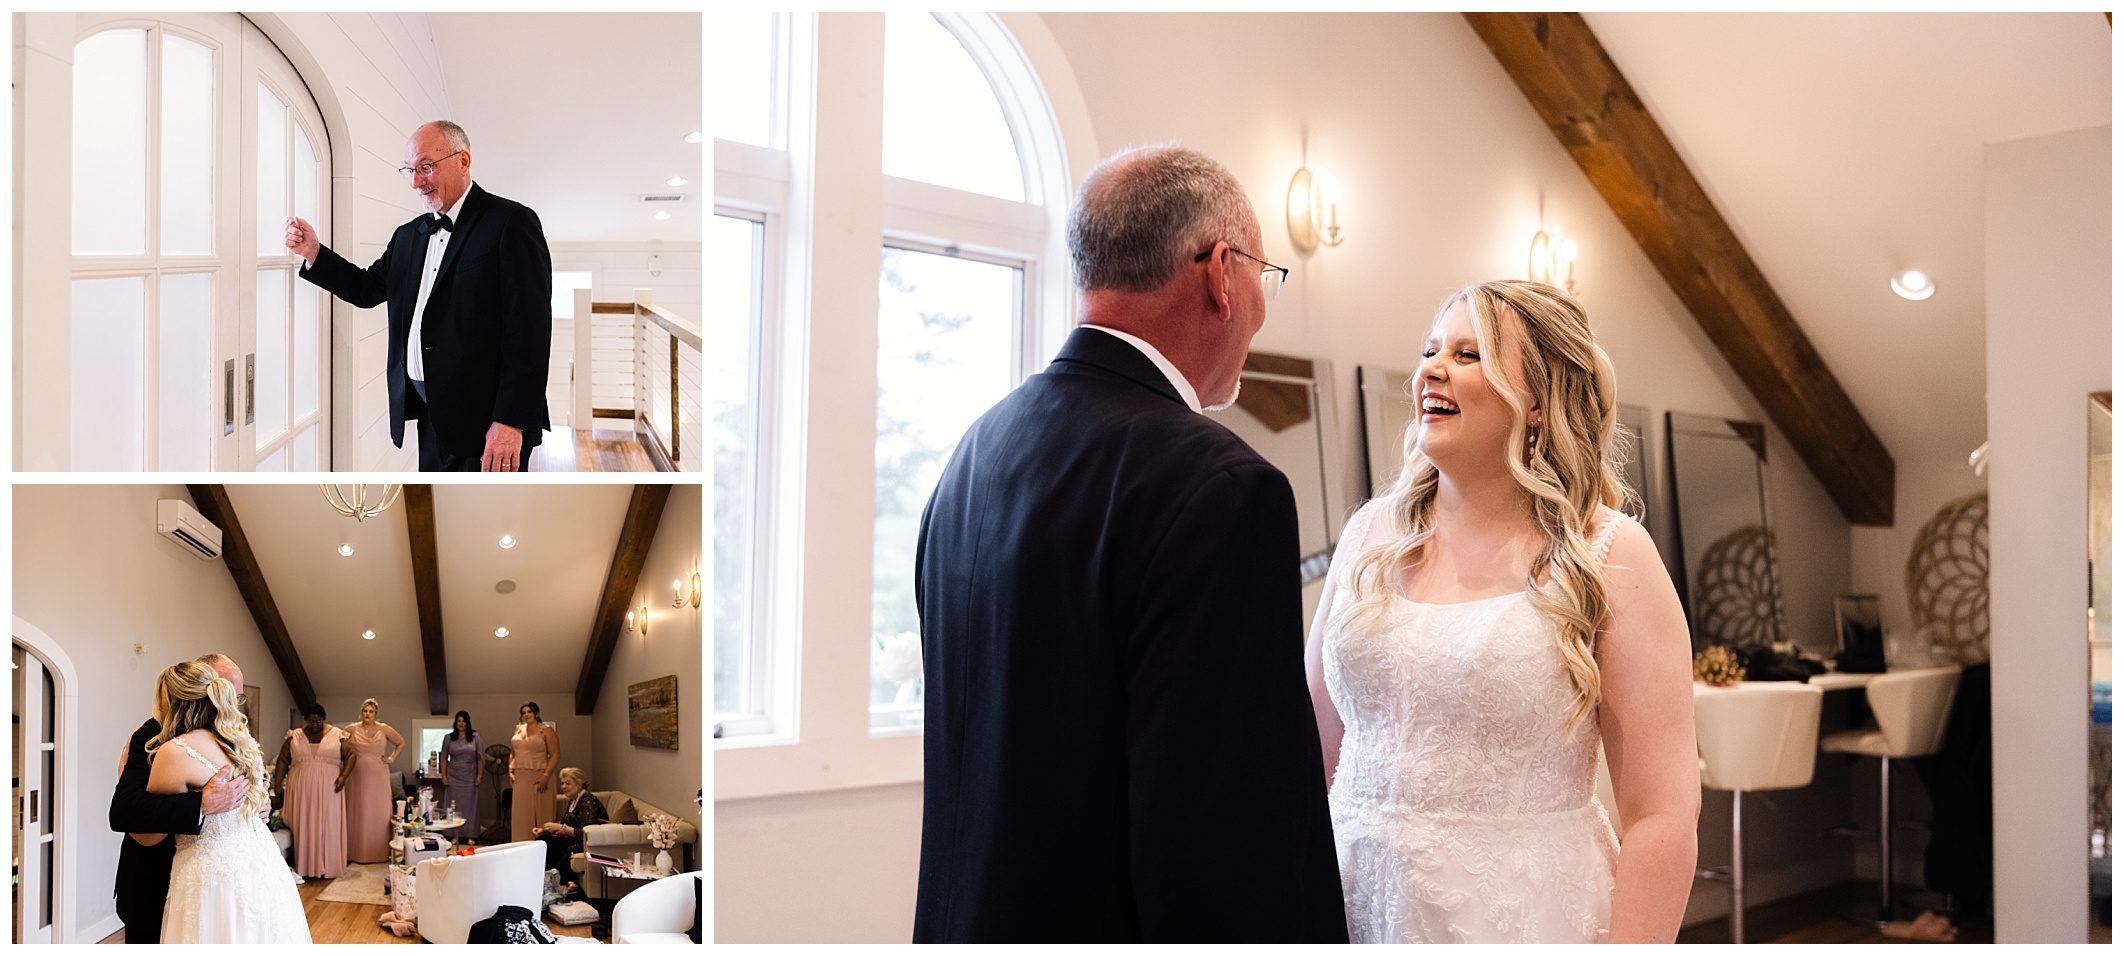 A collage of a mountain wedding day at Chestnut Ridge: father sees bride in her dress for the first time, sharing a joyful moment; bride preparing with bridesmaids in a decorated room.